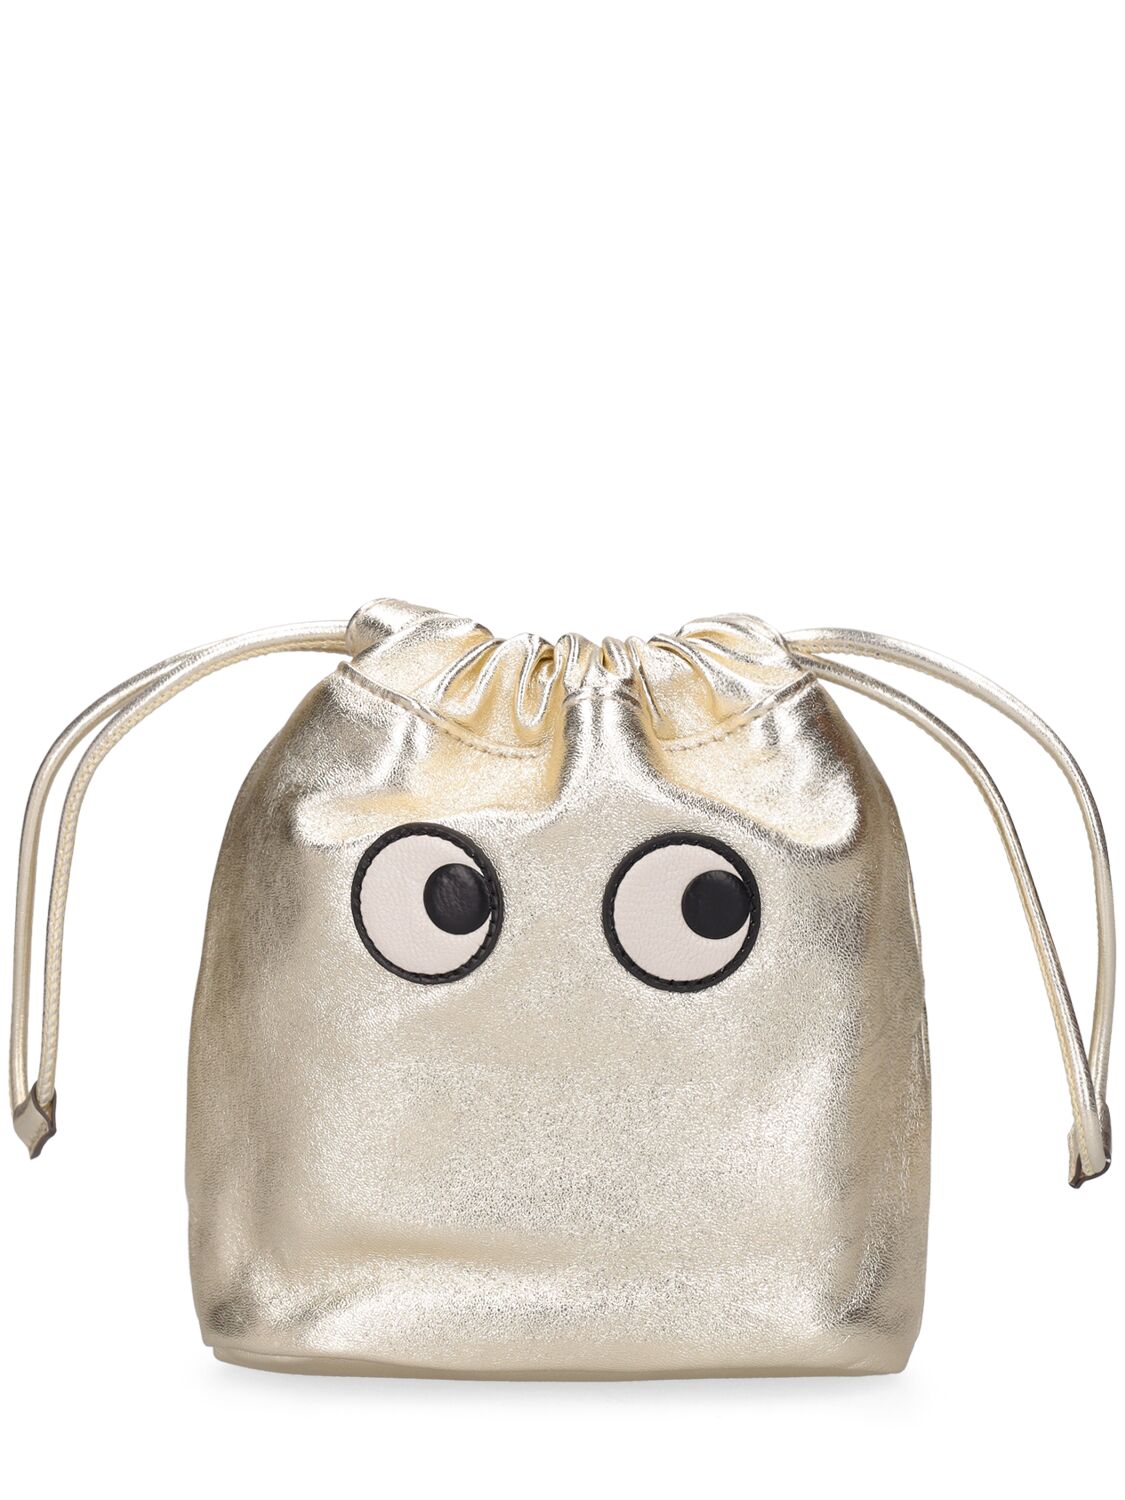 Anya Hindmarch Drawstring Eyes Metallic Leather Pouch In Light Gold